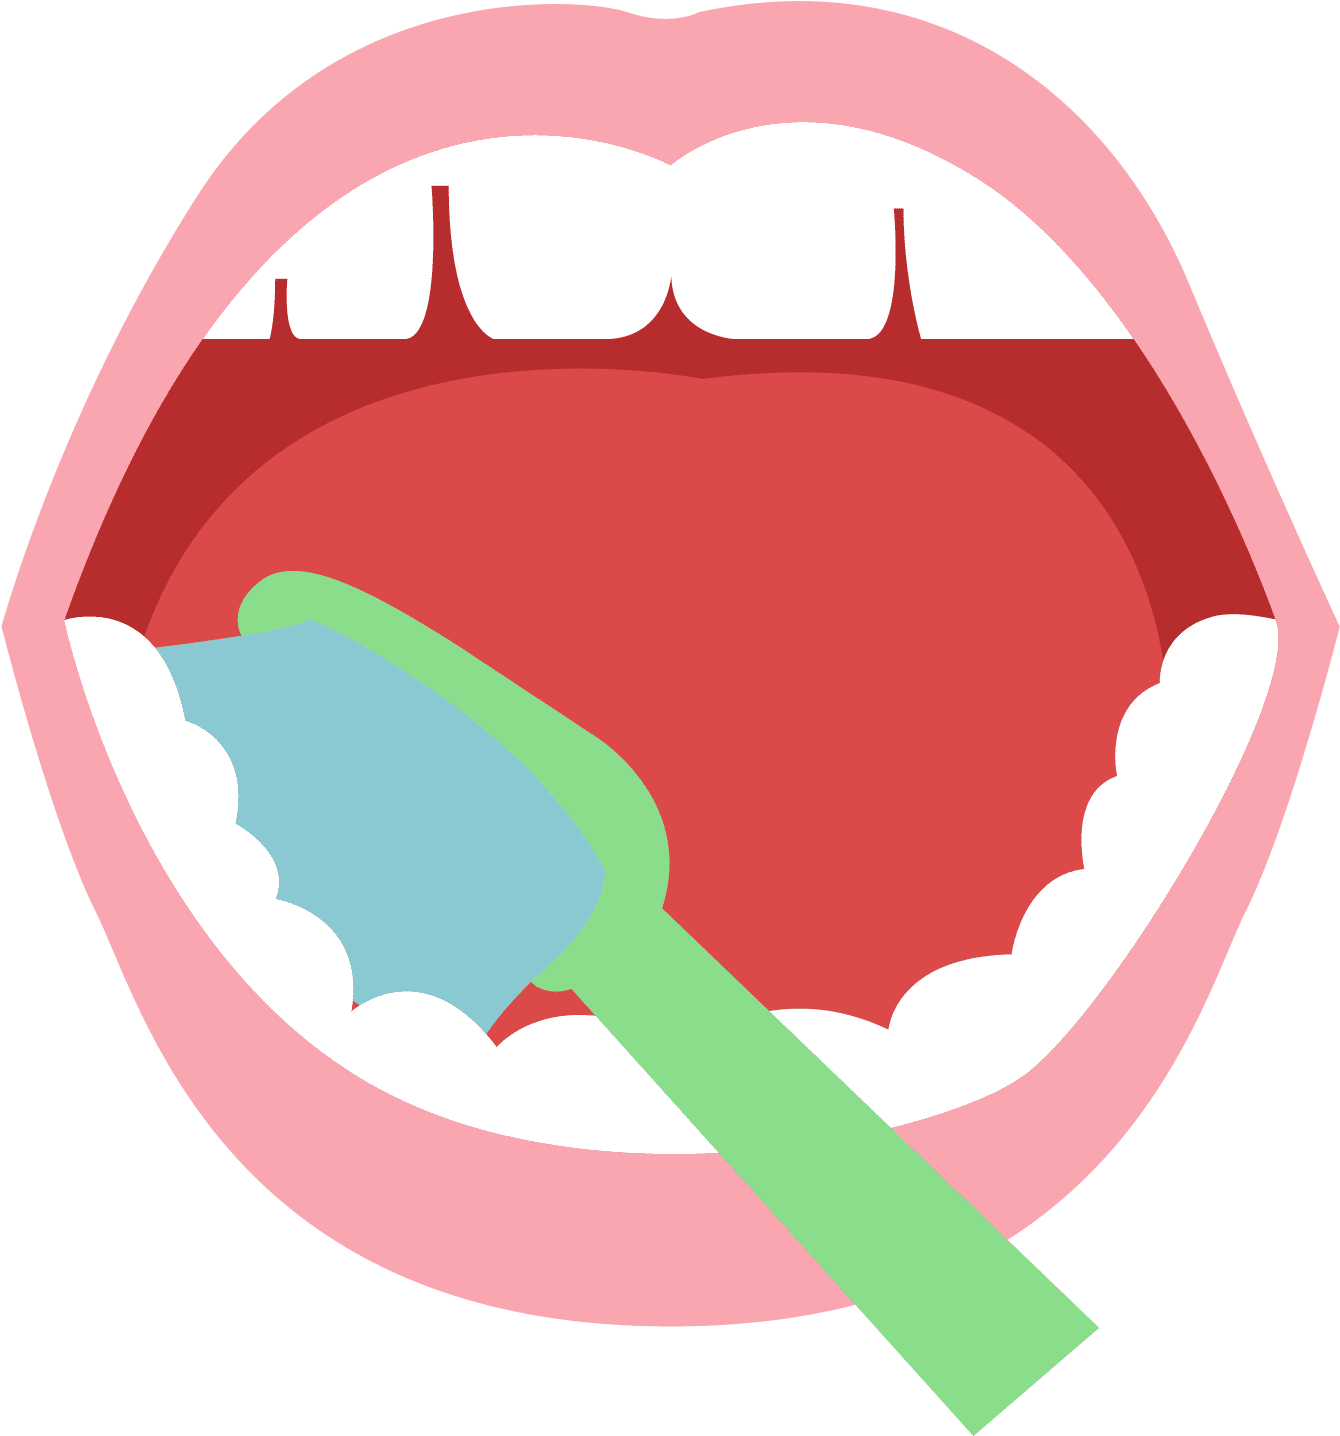 Teeth tooth brushing toothbrush clipart brush your vector